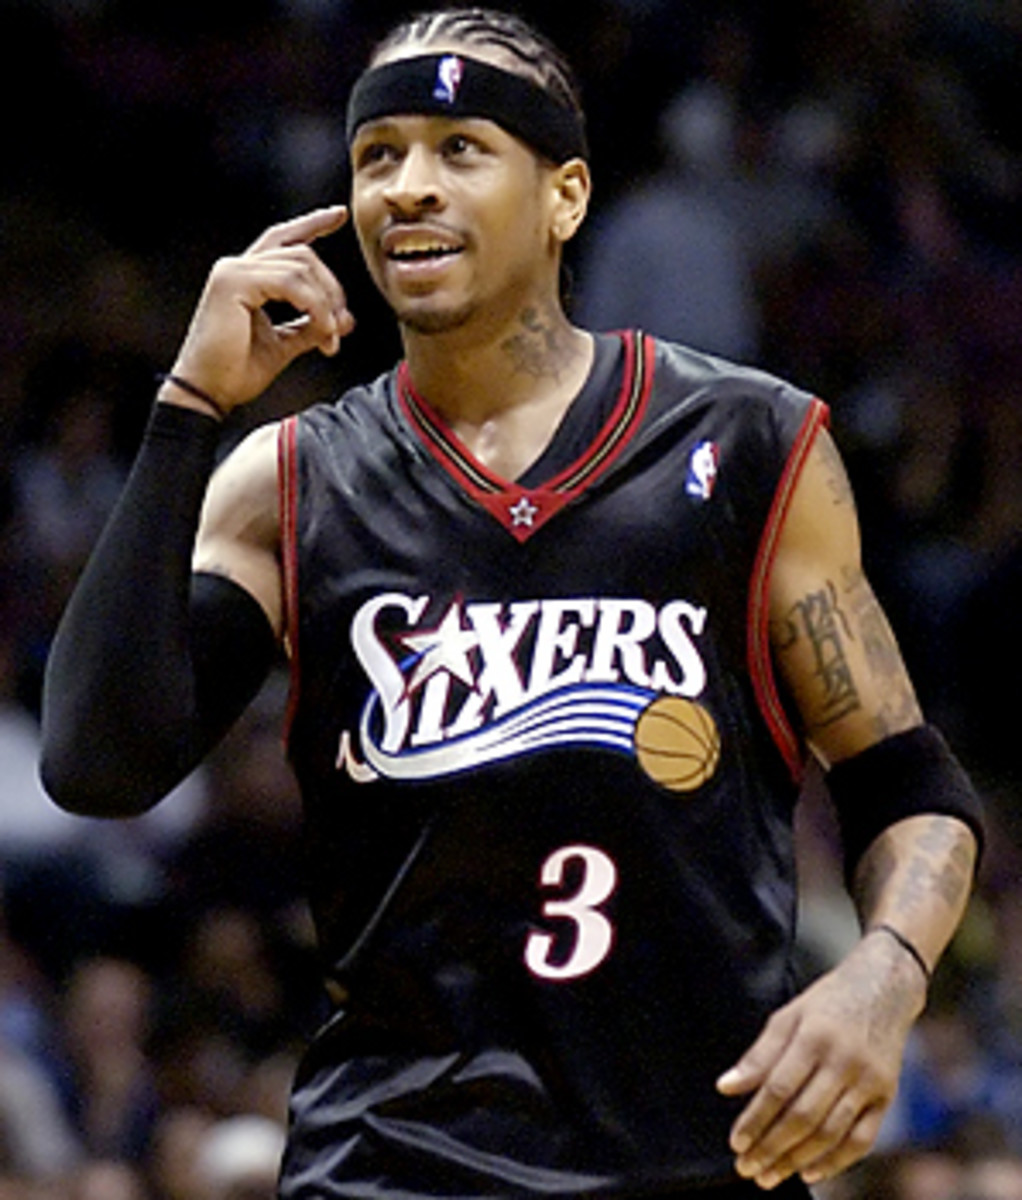 Allen Iverson welcomed by Detroit Pistons